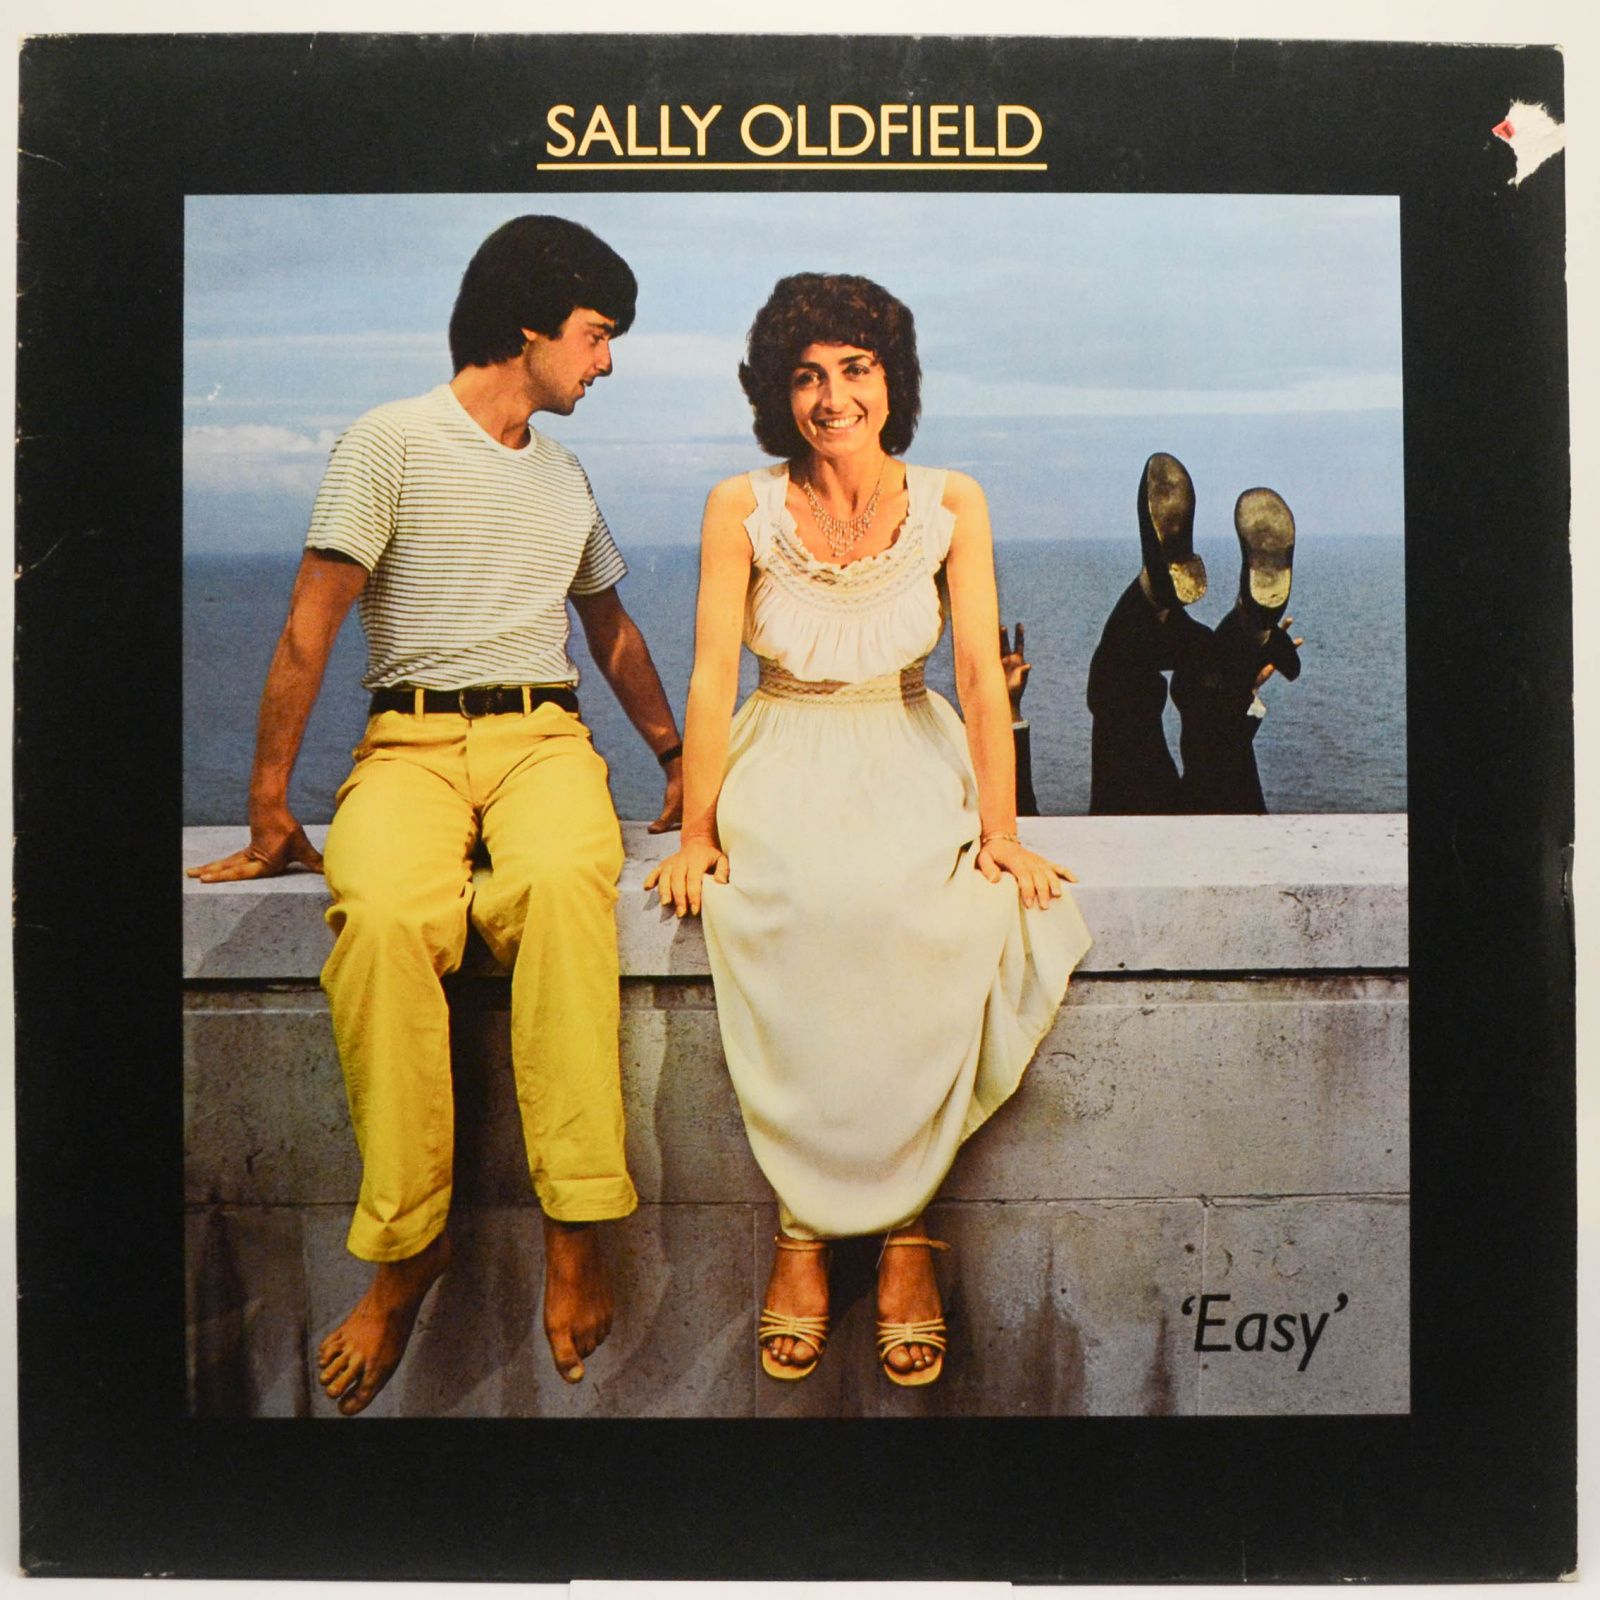 Sally Oldfield — Easy, 1979